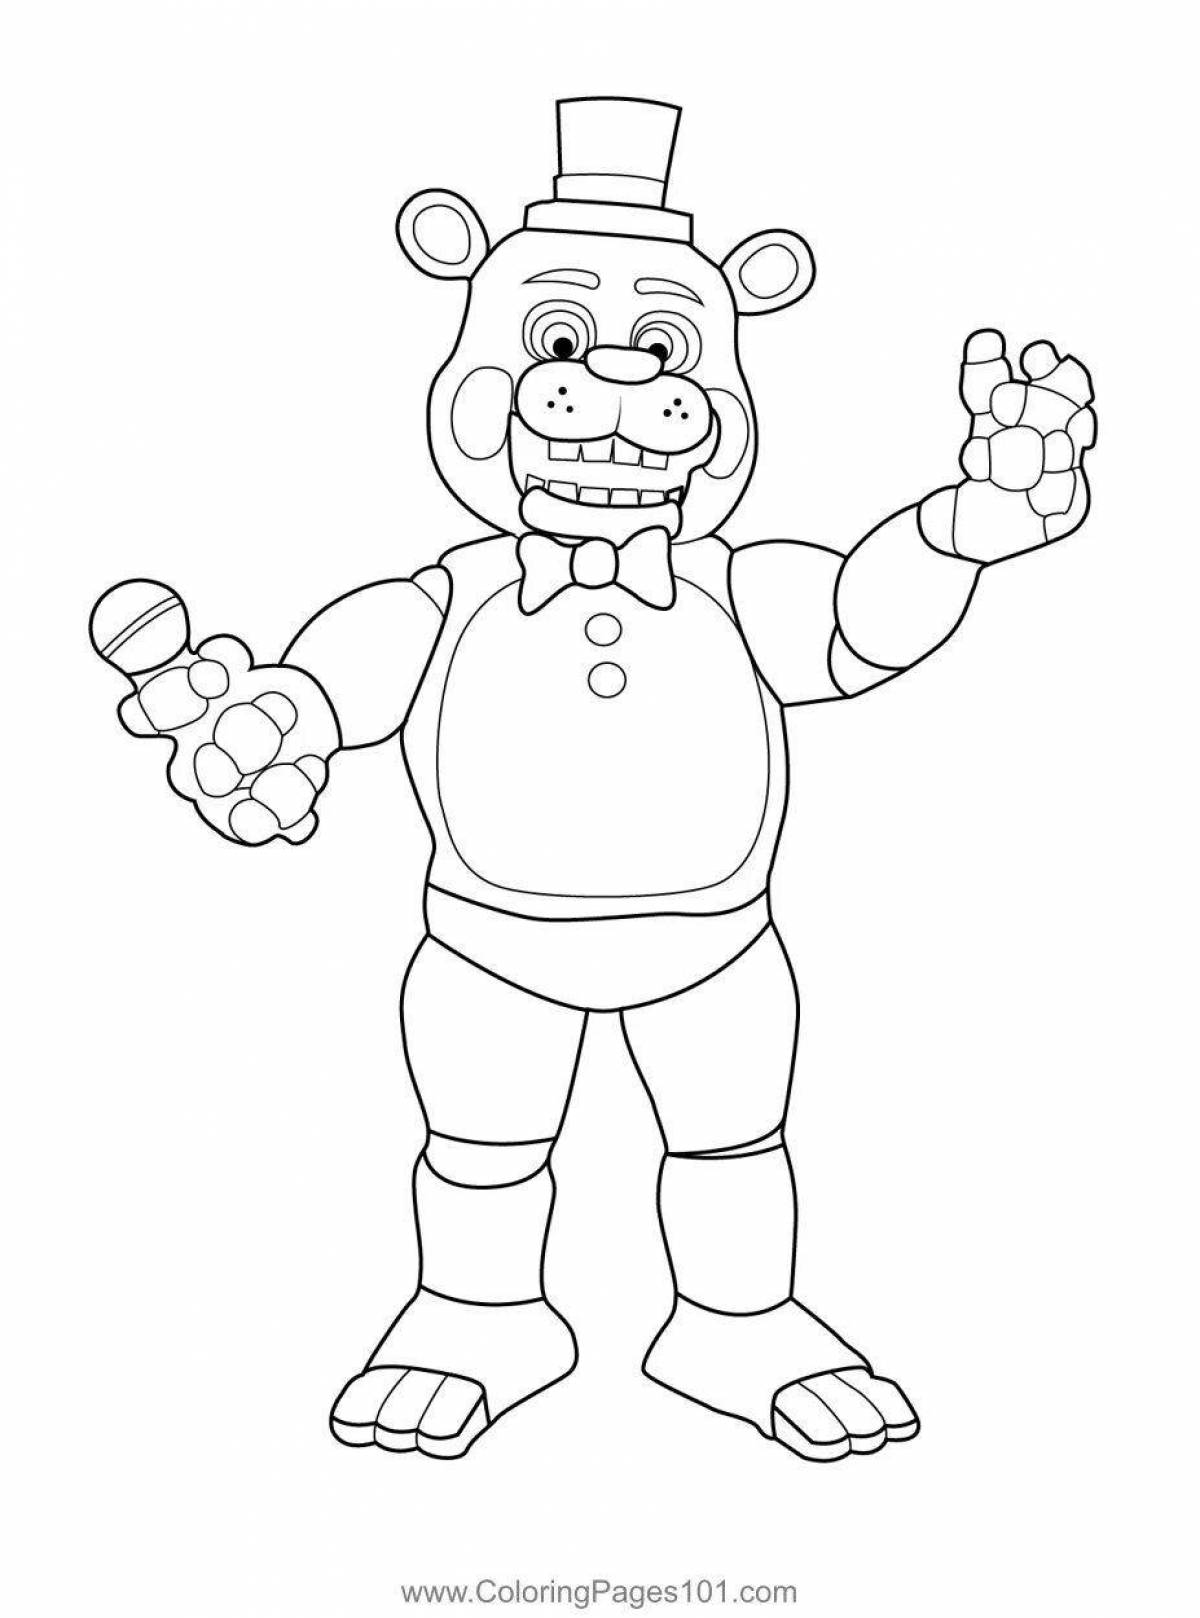 Golden Freddy Animated Coloring Page